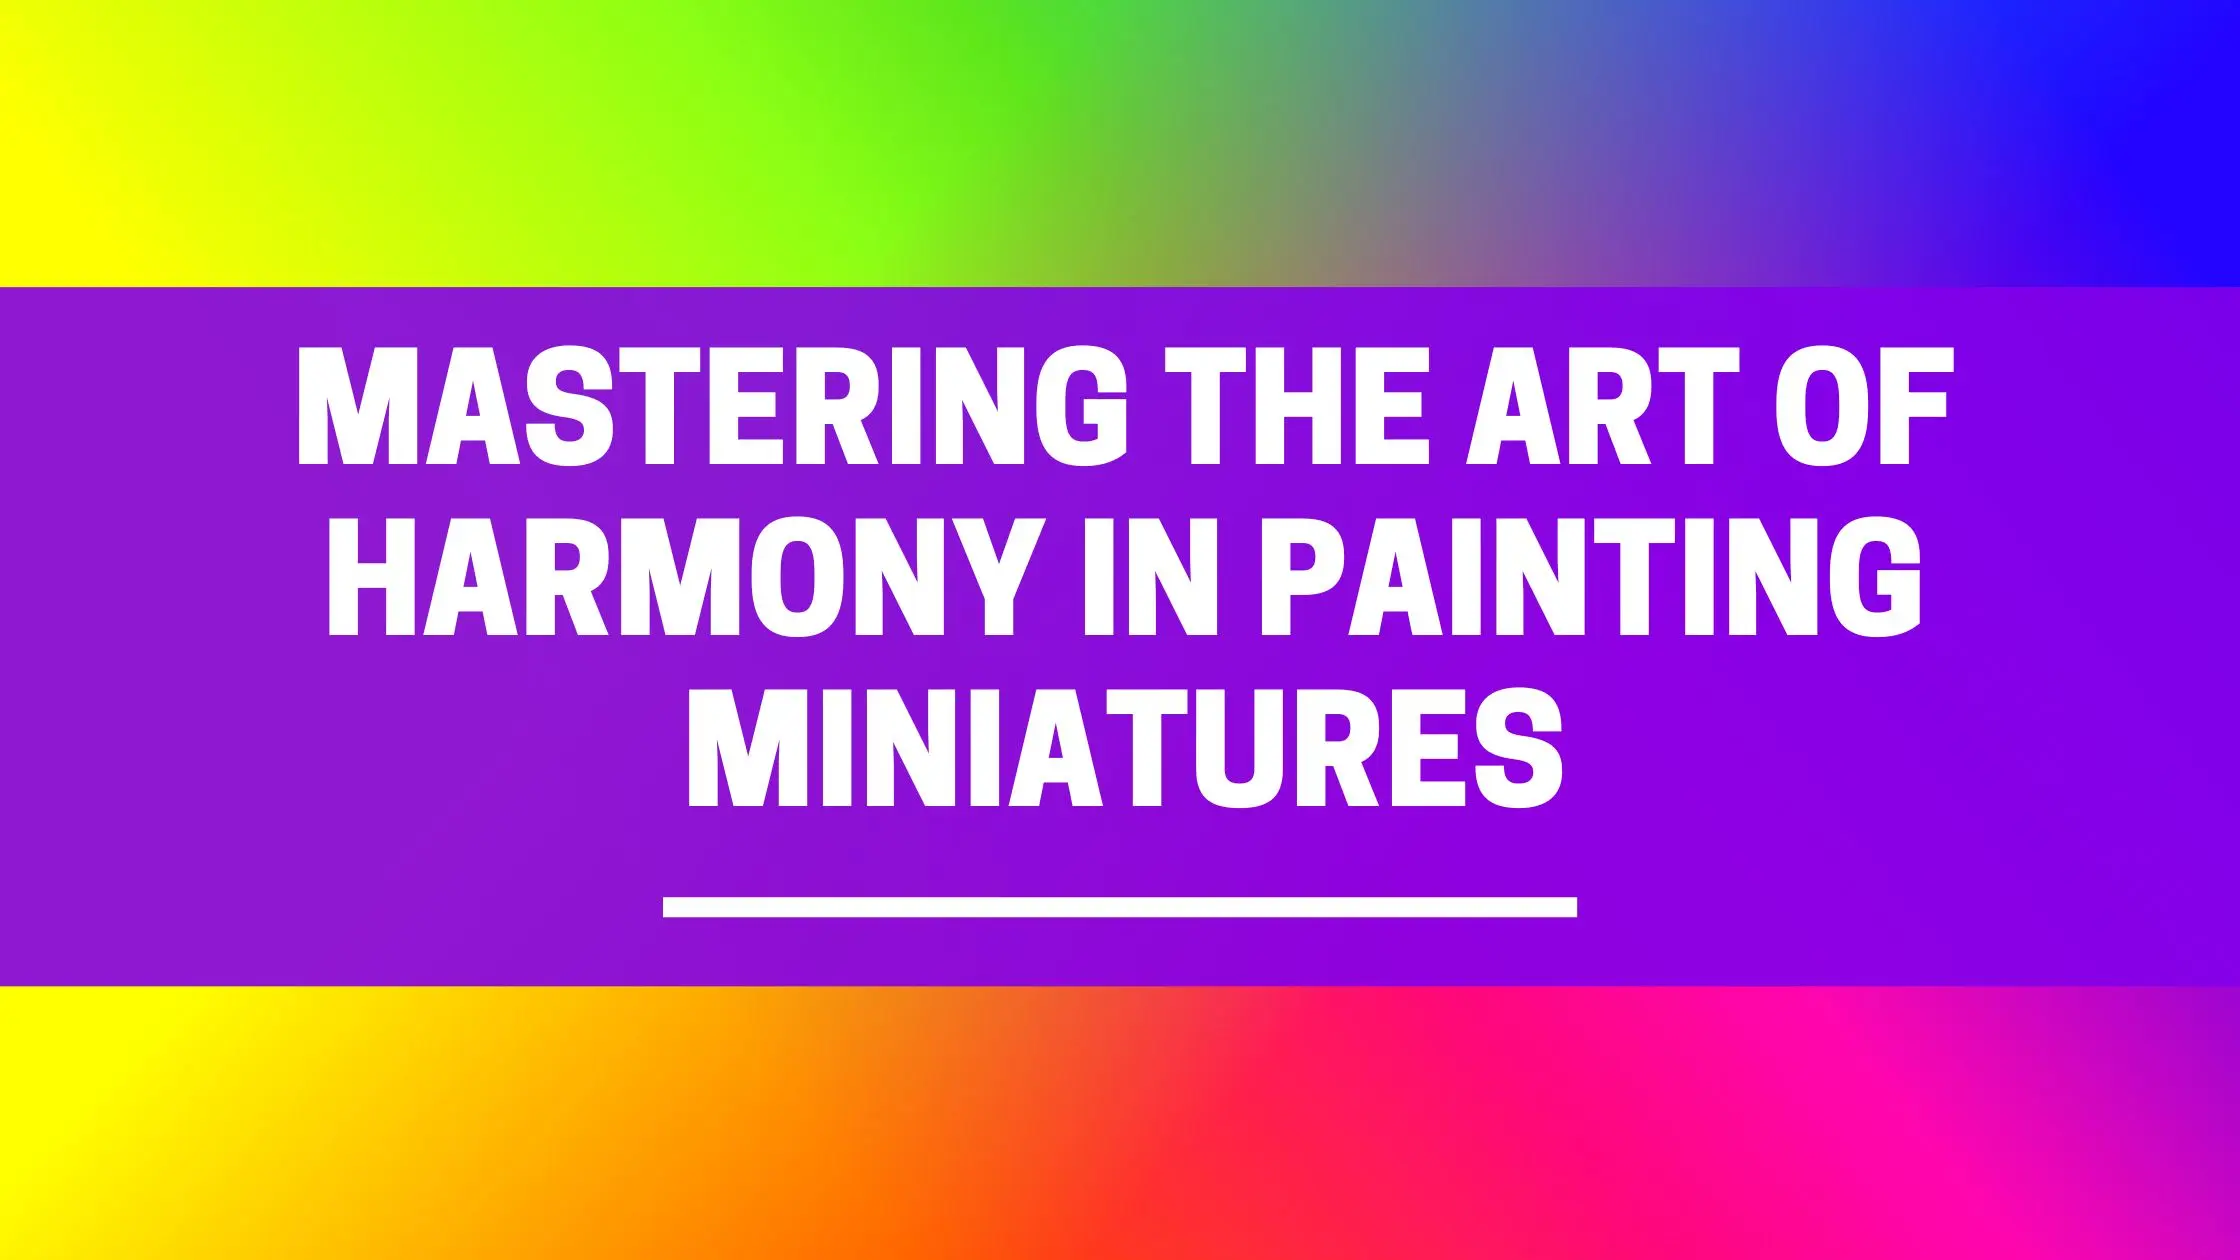 The art of harmony in painting miniatures